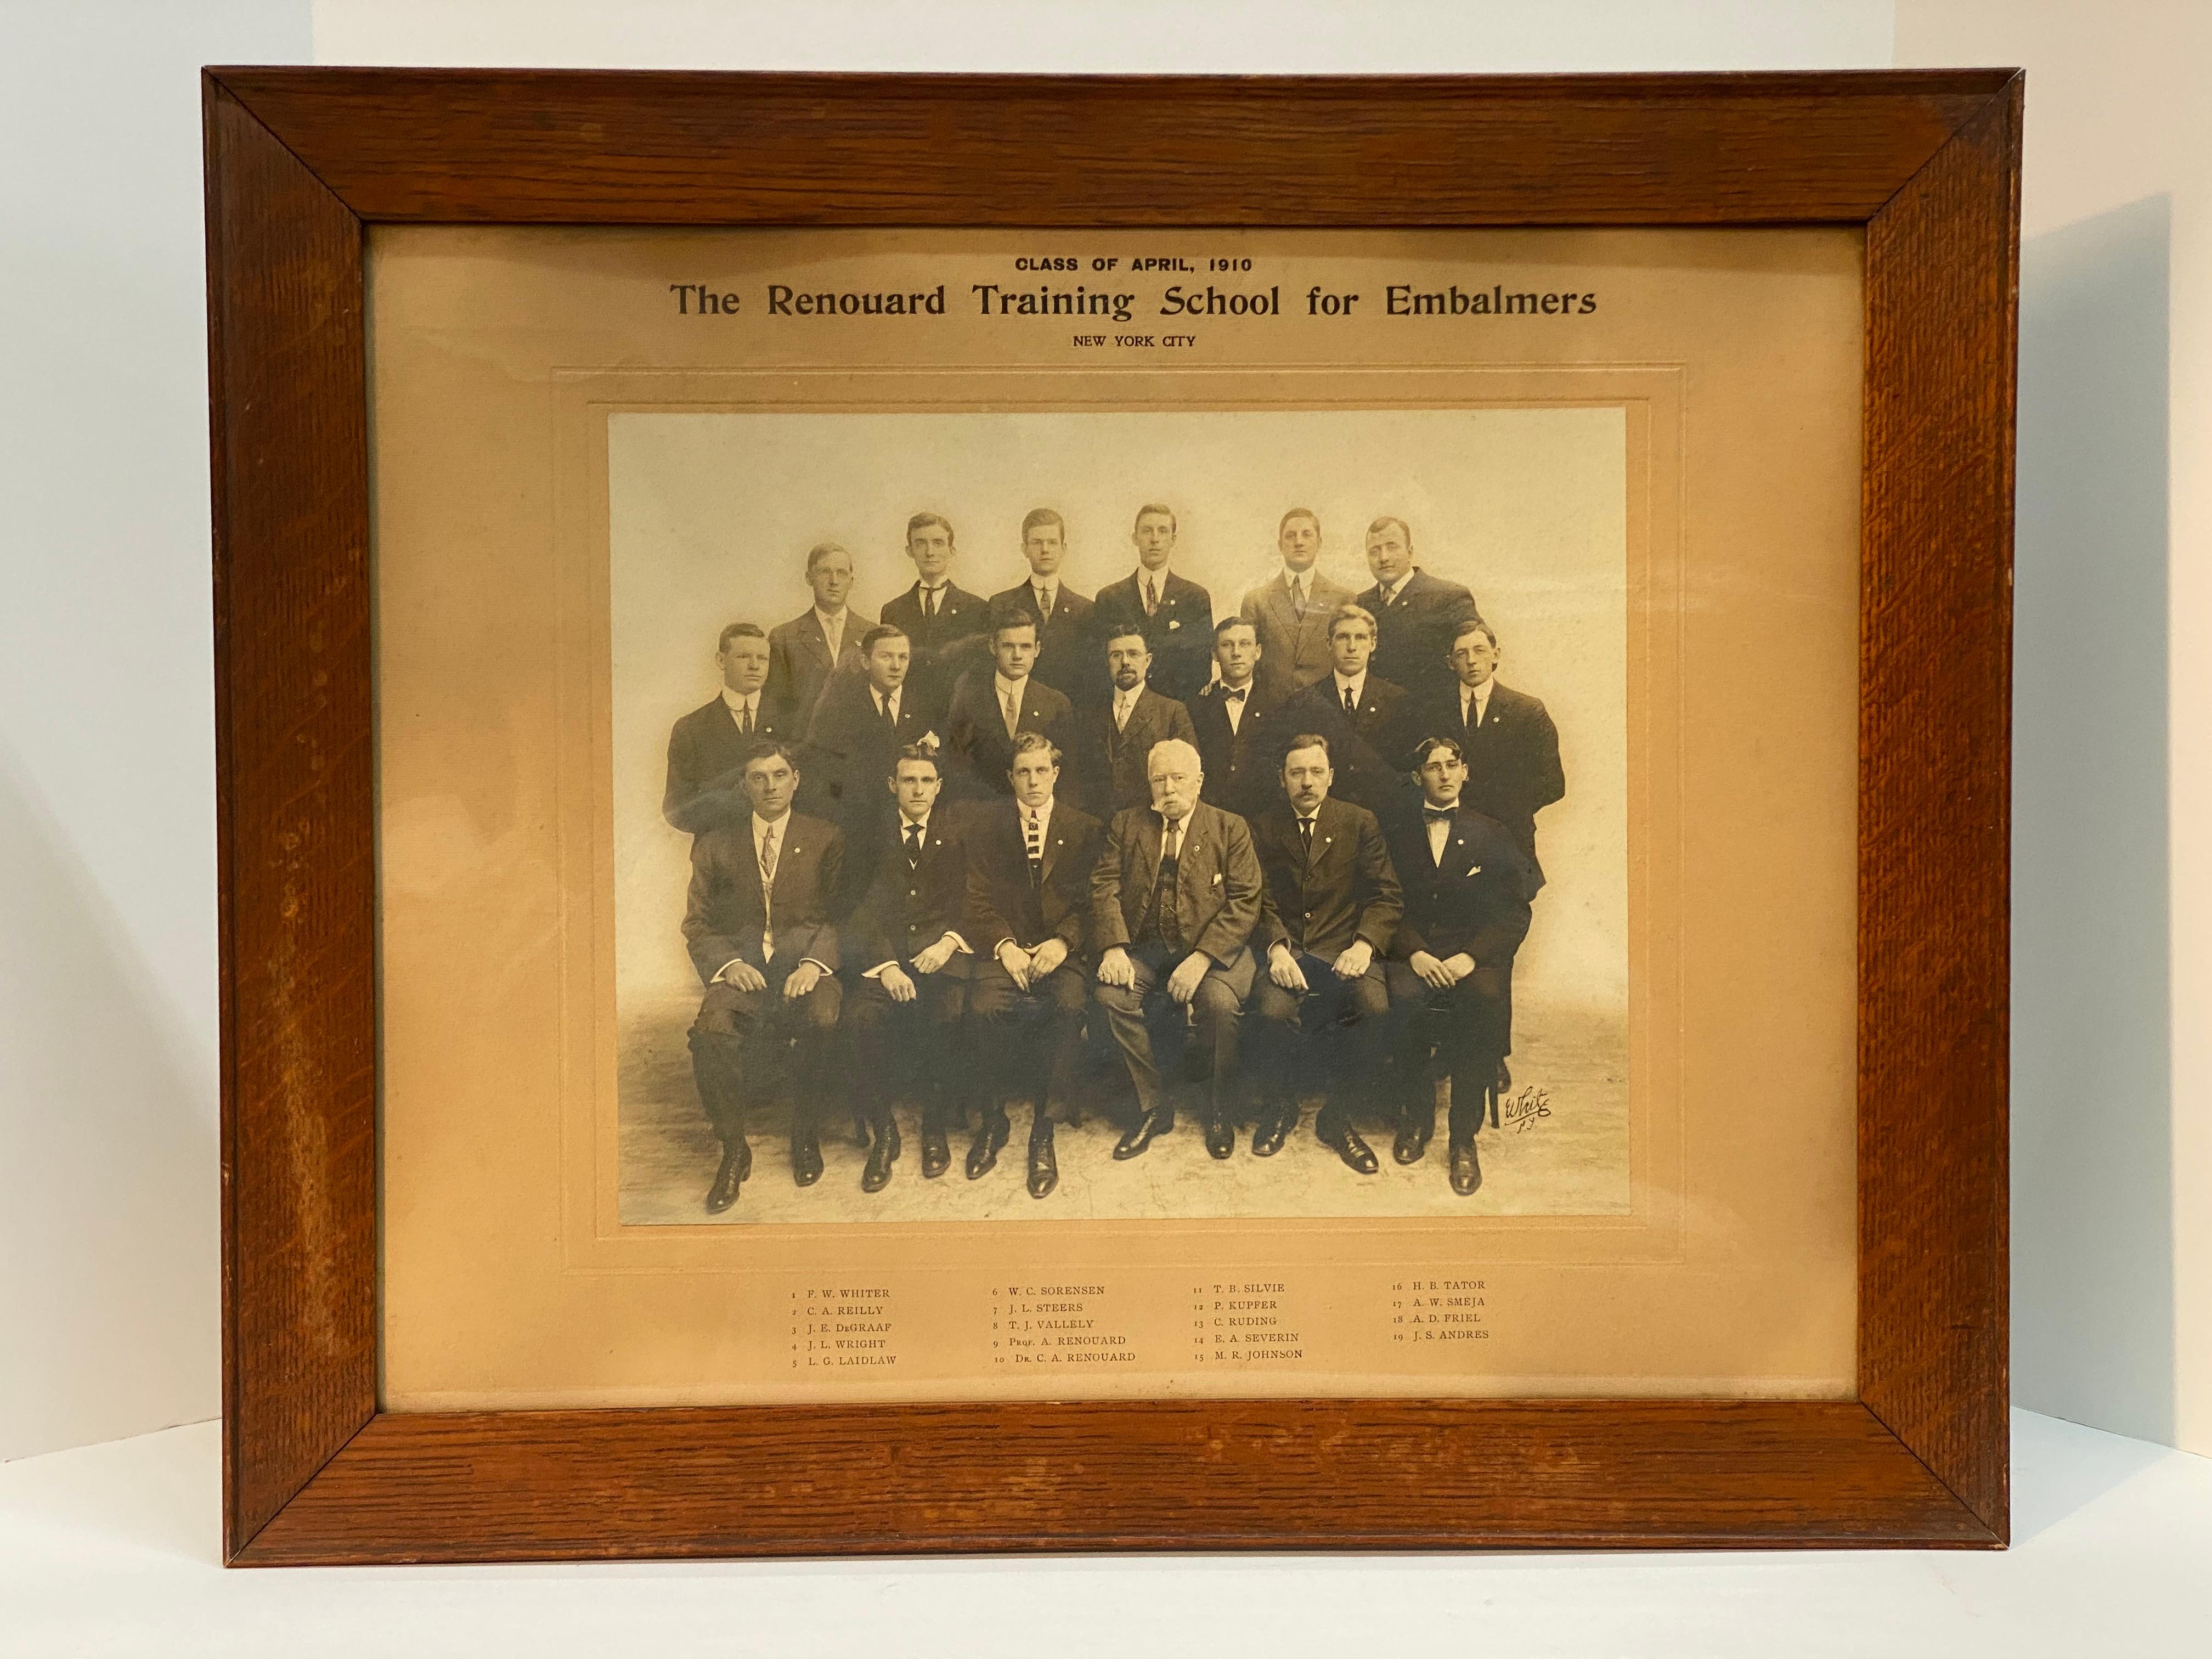 A veritable who's who of turn of the 20th Century embalmers. These fine career men depicted in black and white photography, circa 1910. The photograph is signed lower right, E(?) White, NY The framing treatment consists of a solid oak frame under